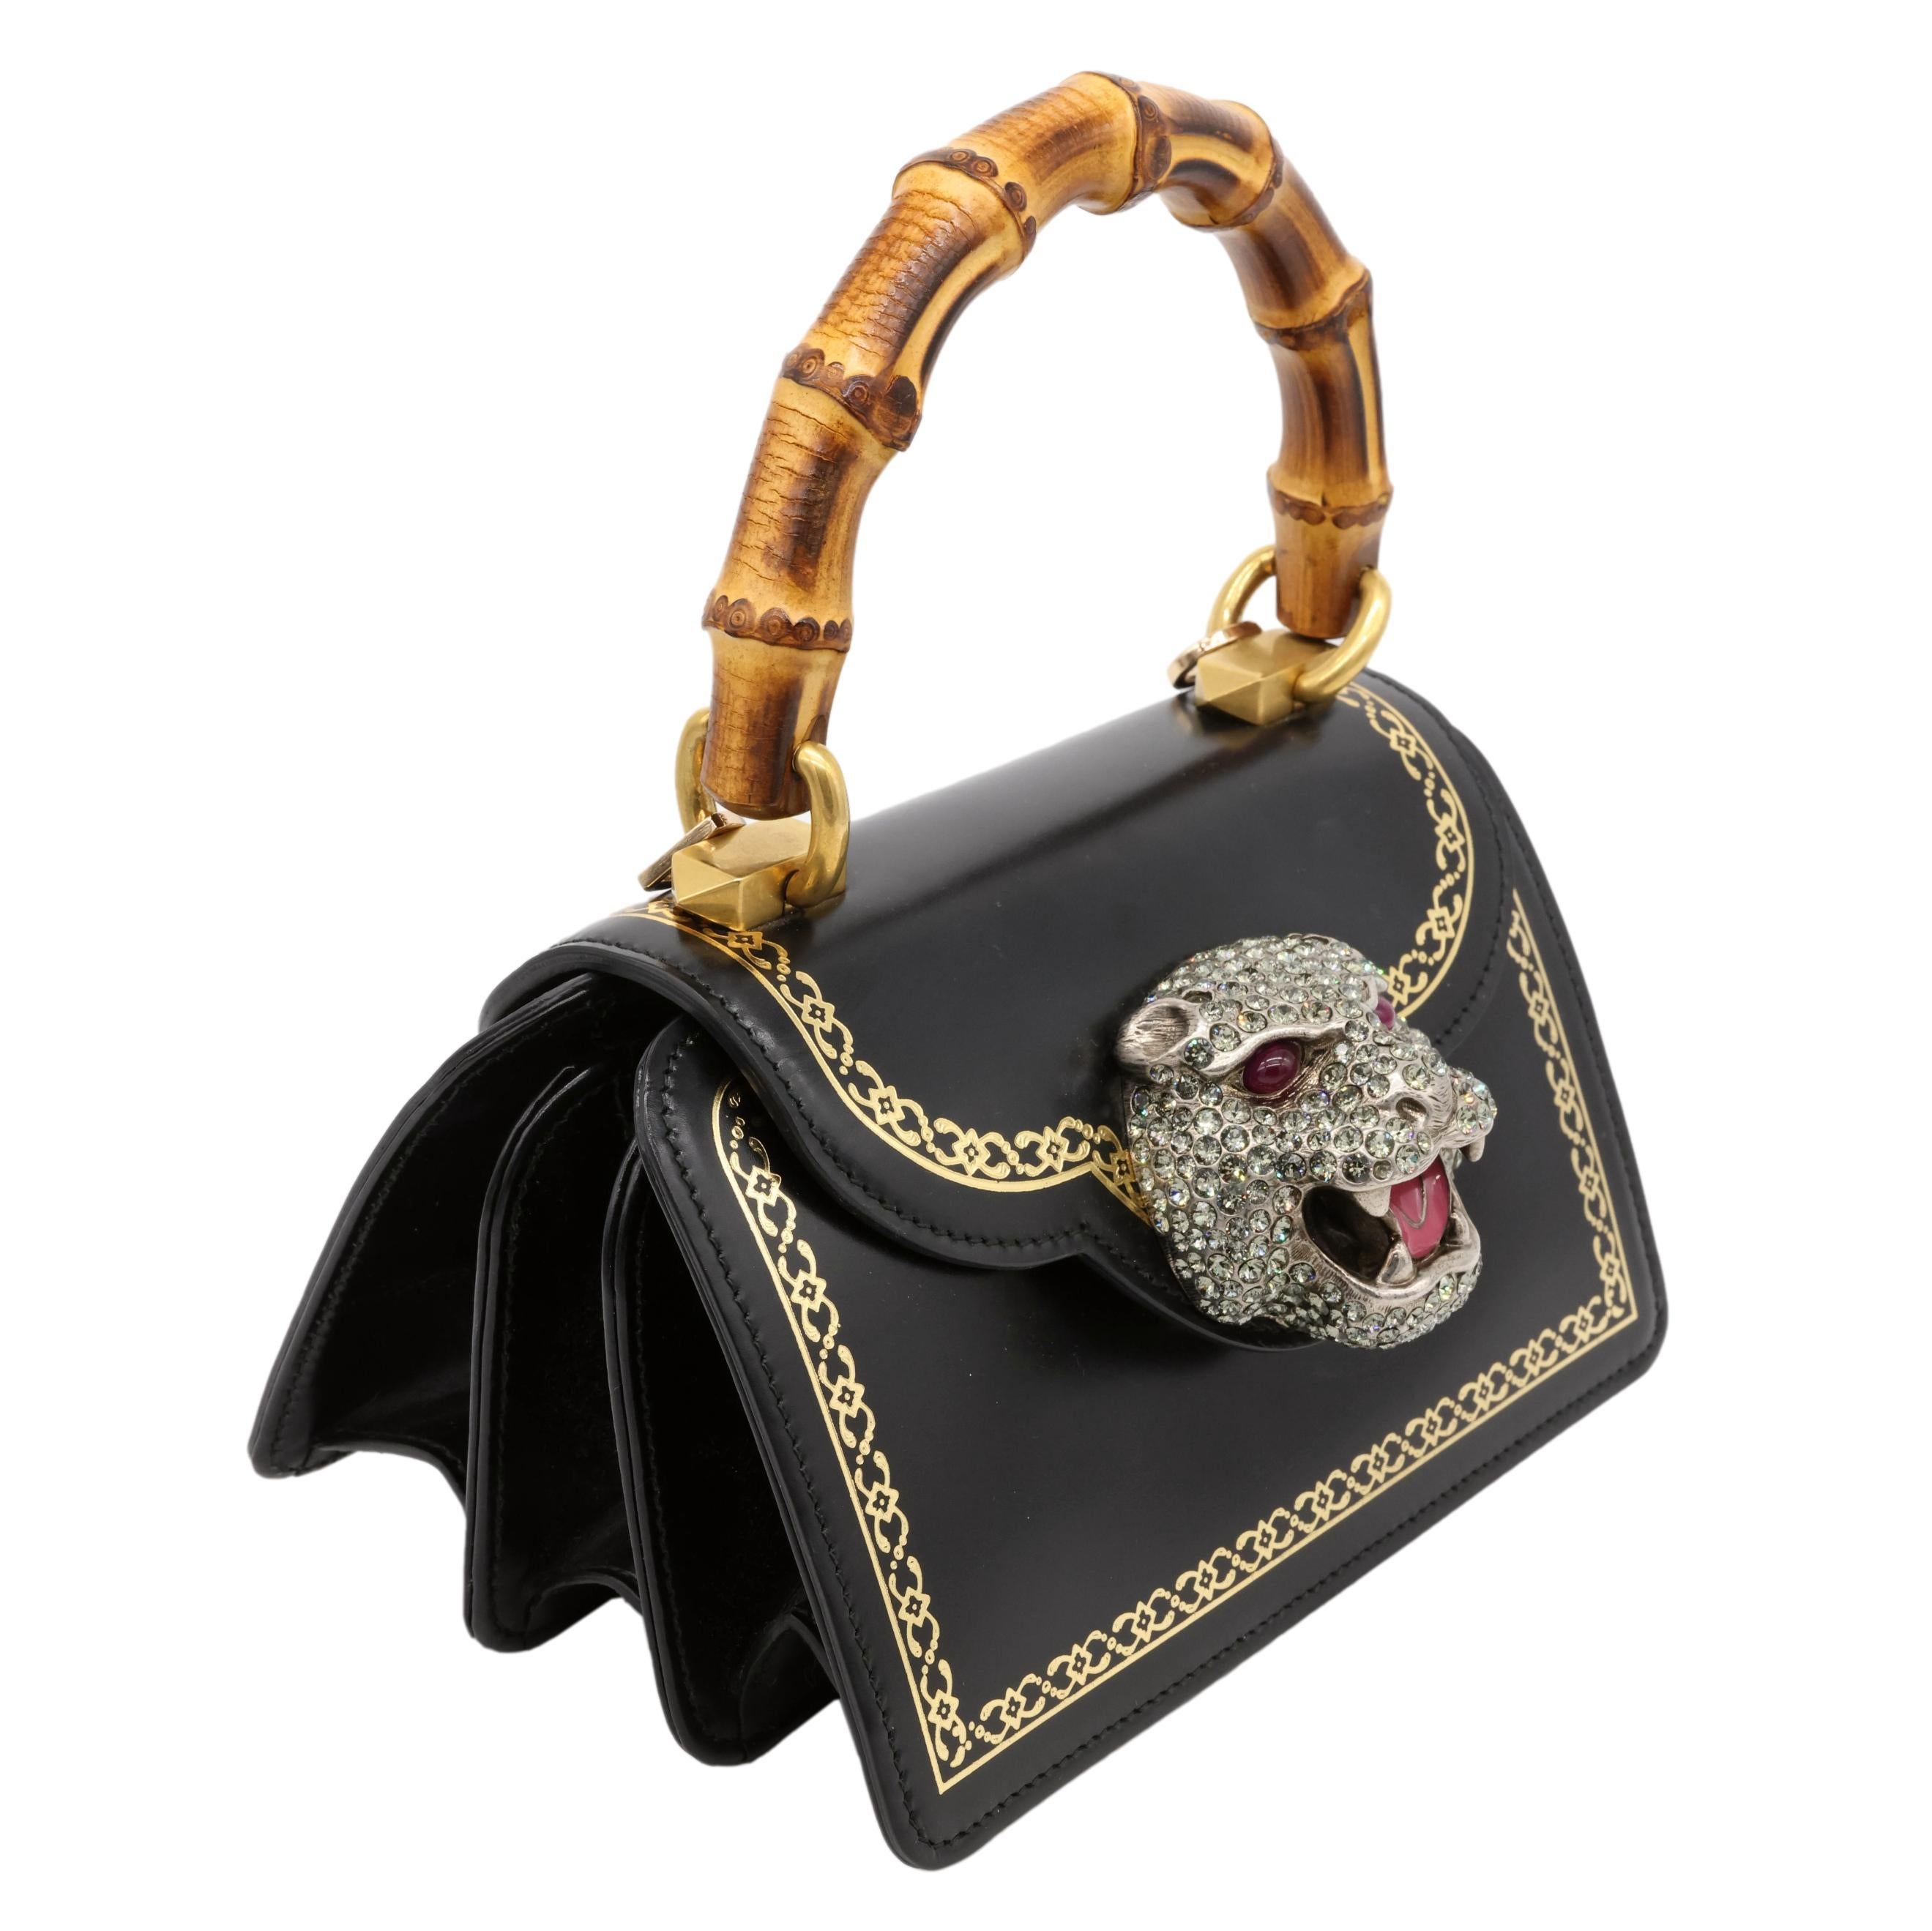 Gucci Mini Thiara Black Leather Bamboo Top Handle Shoulder Bag, 2018. First introduced in the early 1940's, the Gucci bamboo bag came into production as materials throughout Europe became scarce. Bamboo, which could still be abundantly sourced from